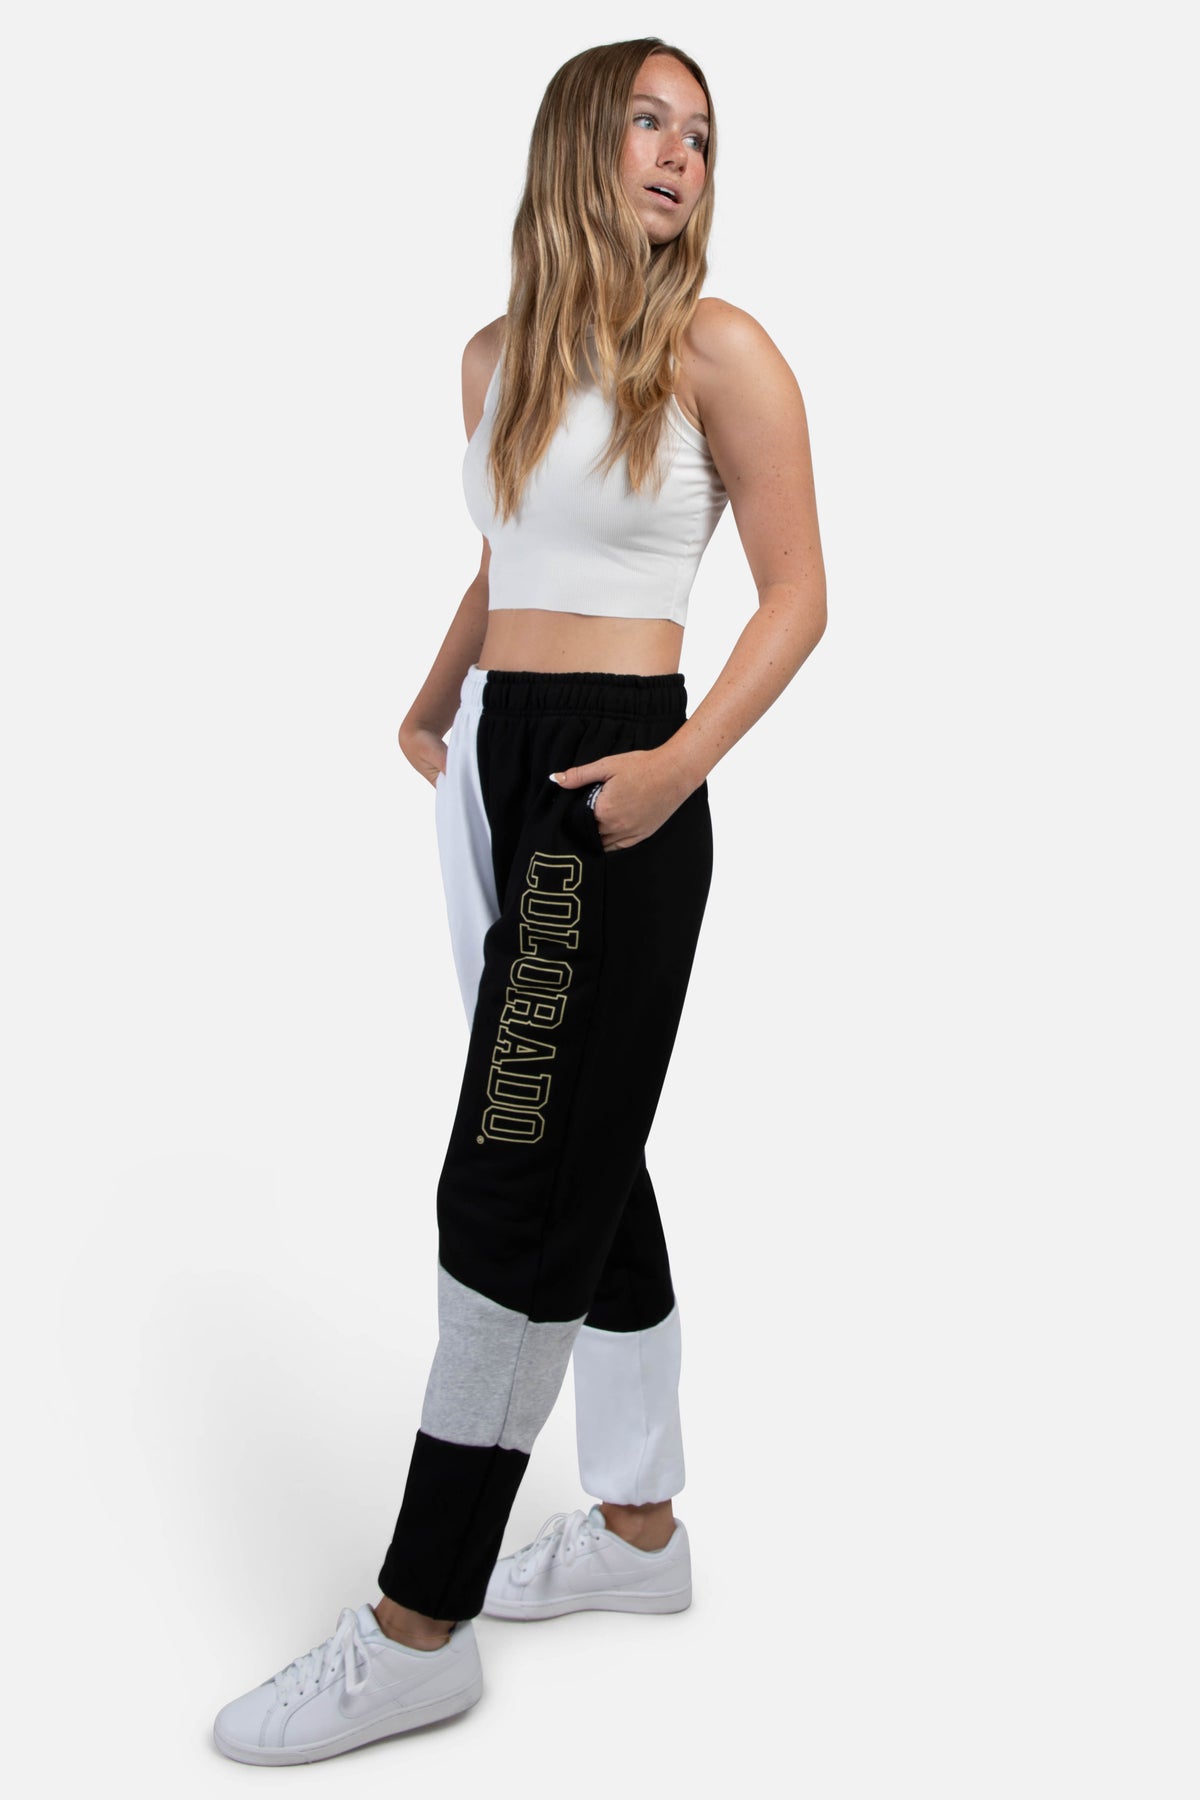 University Of Colorado Patched Pants